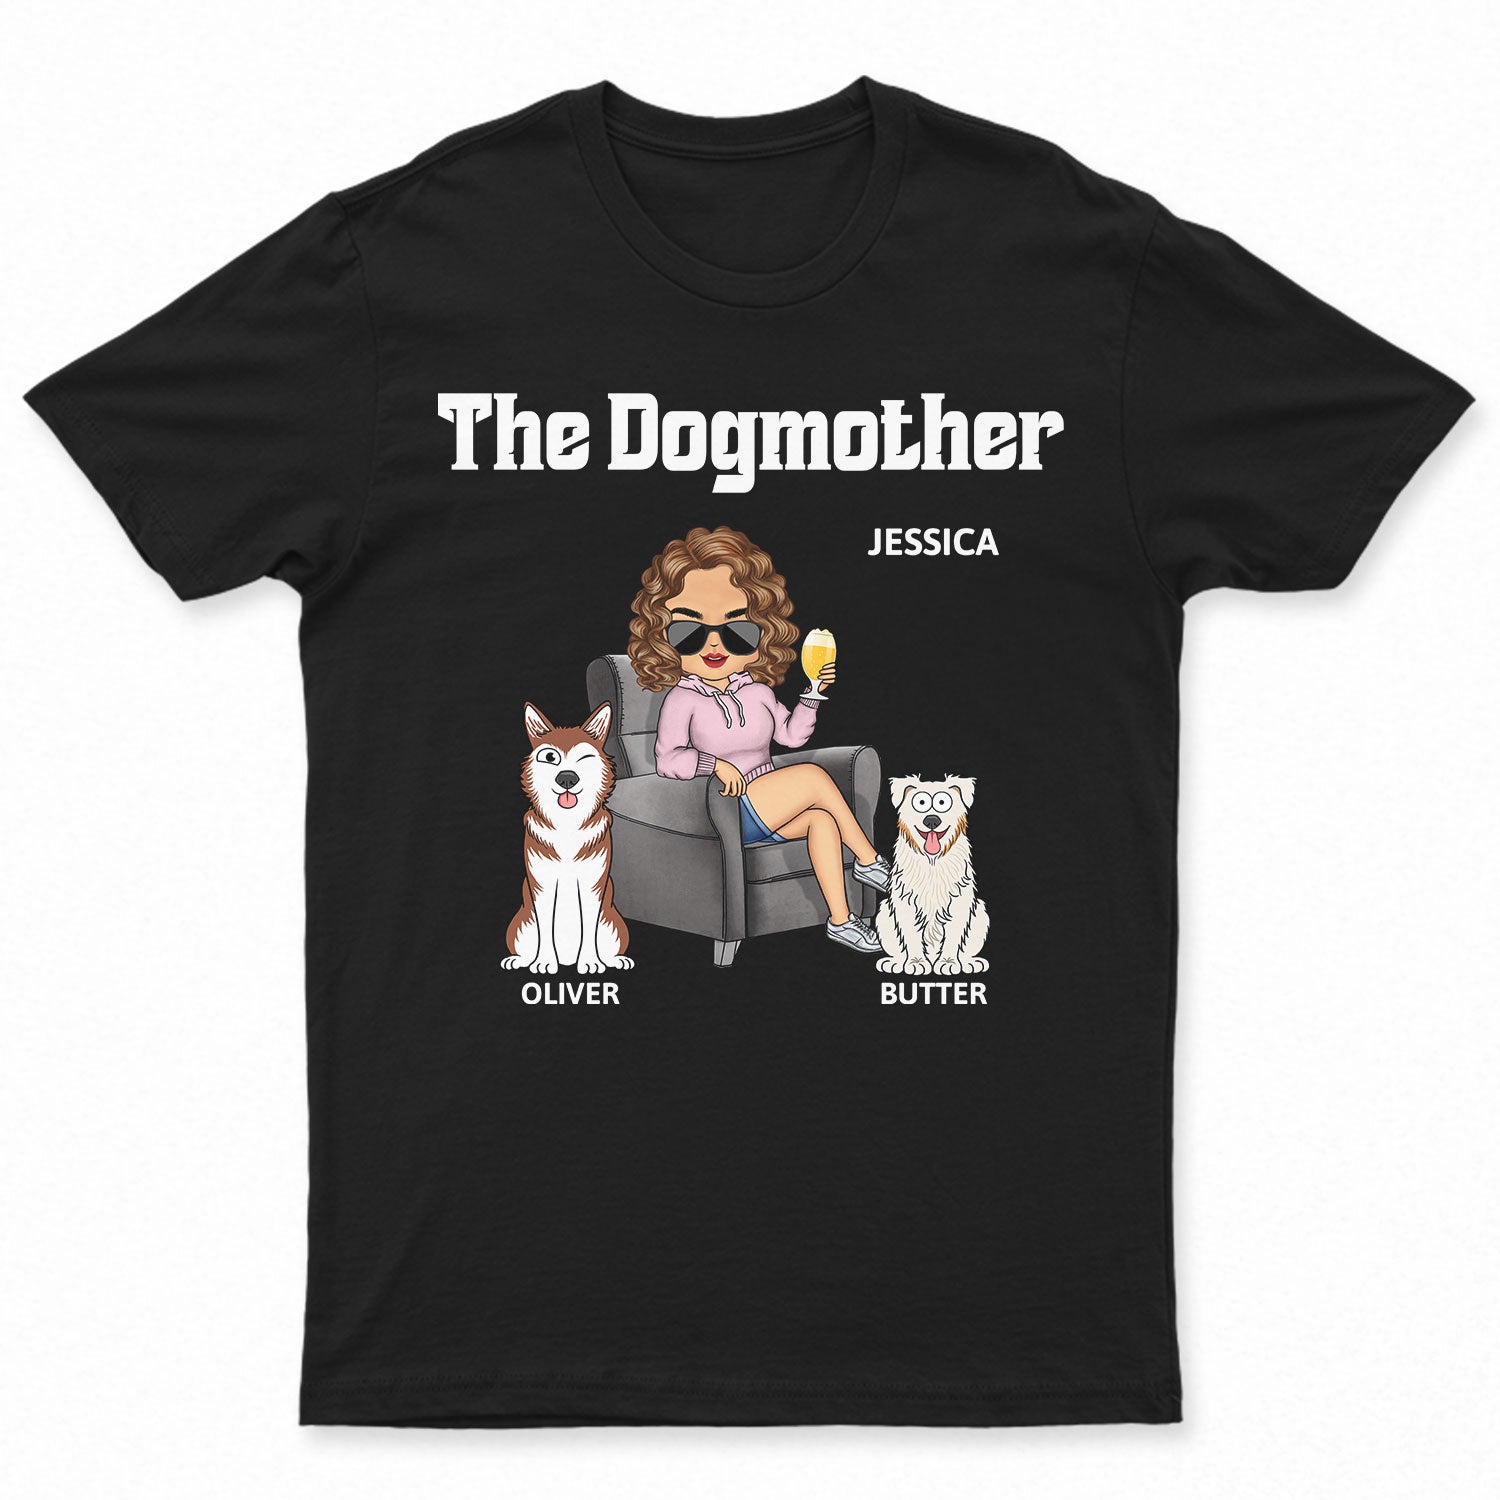 The Dog Mother - Gift For Dog Moms, Dog Lovers, Women, Yourself - Personalized T Shirt